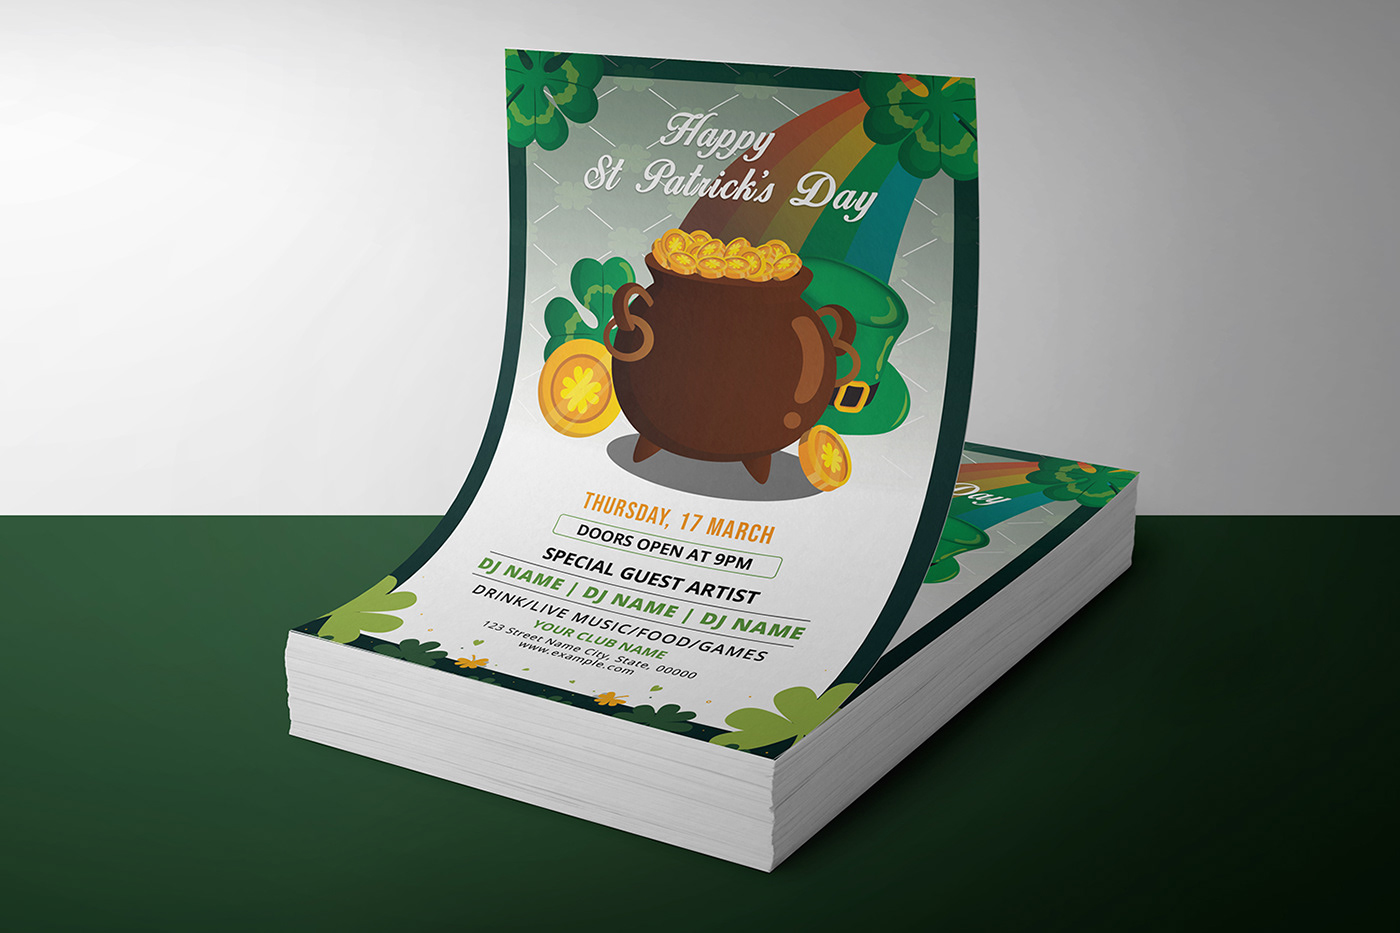 party flyer St Patricks Day ms word psd irish party invitation template paddy day patrick day celebration patrick day event saint patrick’s day